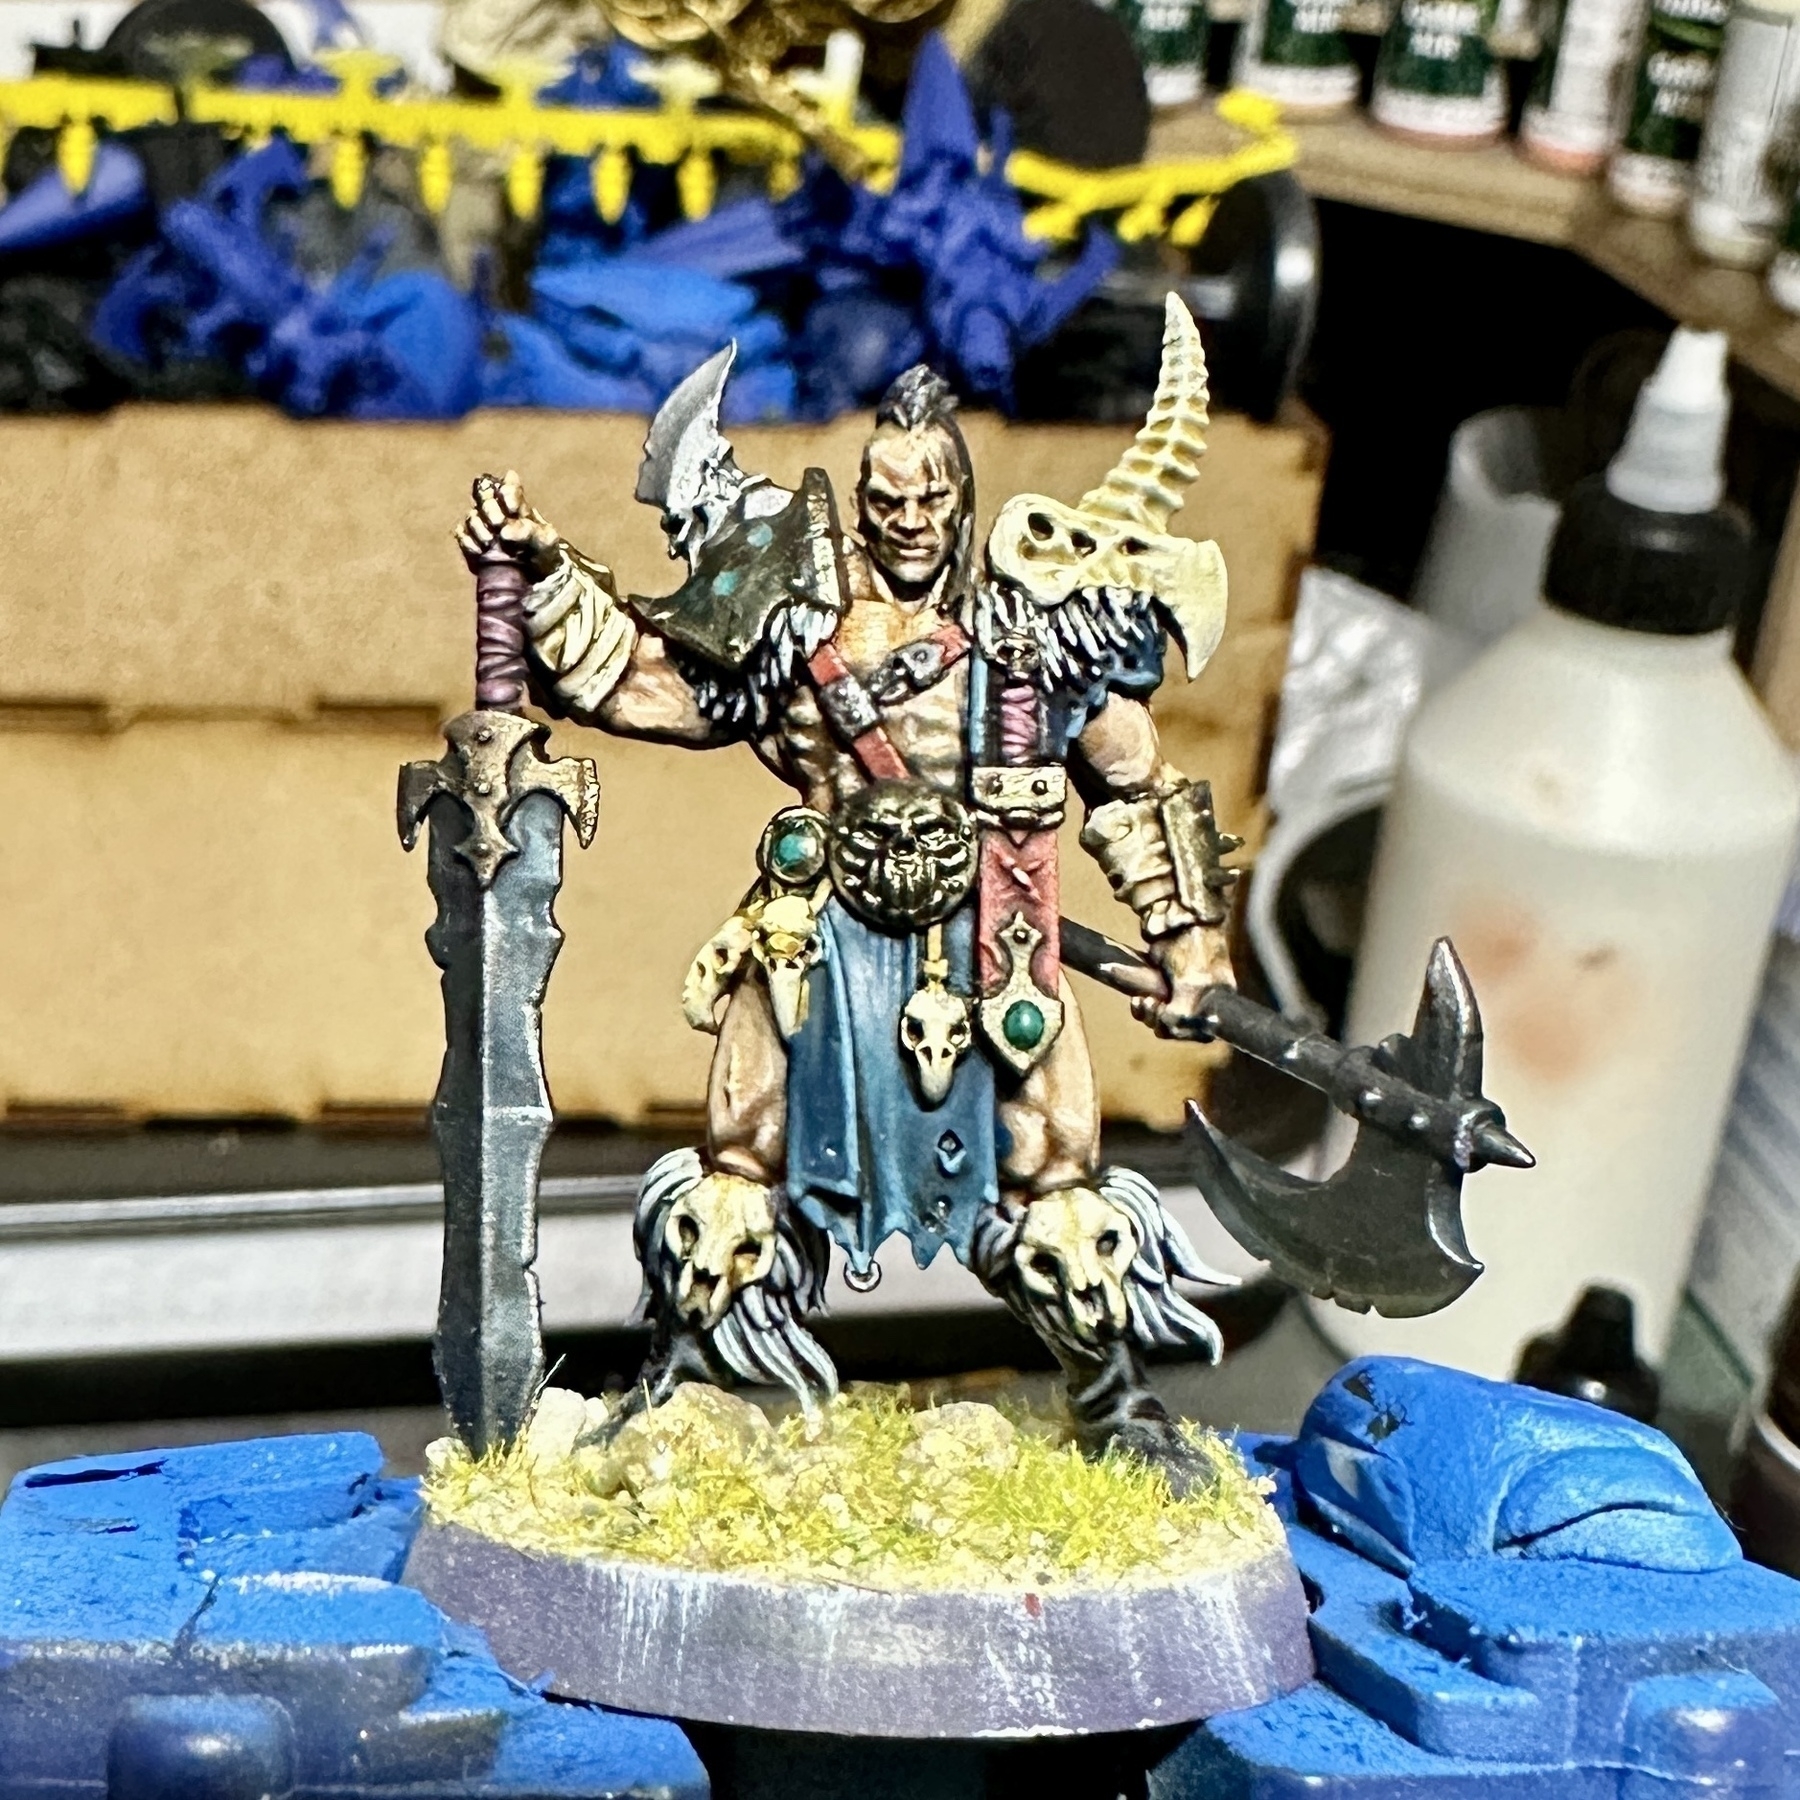 A mostly painted miniature fantasy warrior figure, armed with an axe and a sword, stands on a textured base amidst painting supplies, including brushes and paints, with other miniatures in the background.